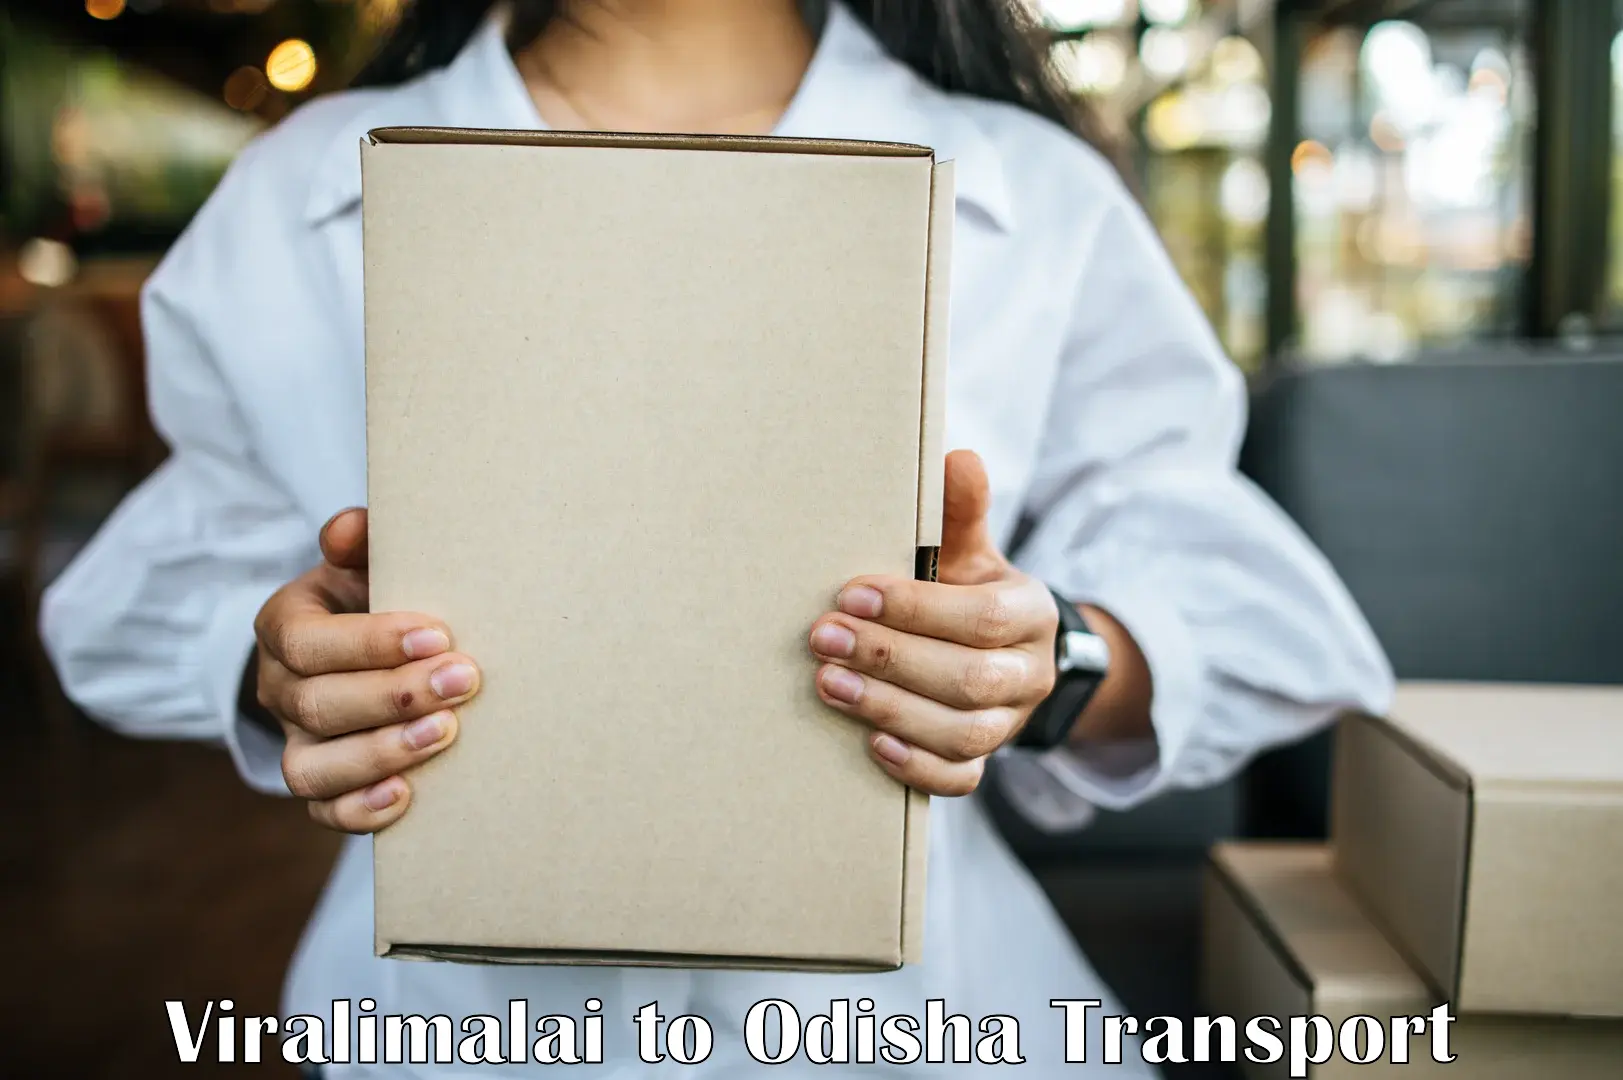 Commercial transport service Viralimalai to Telkoi